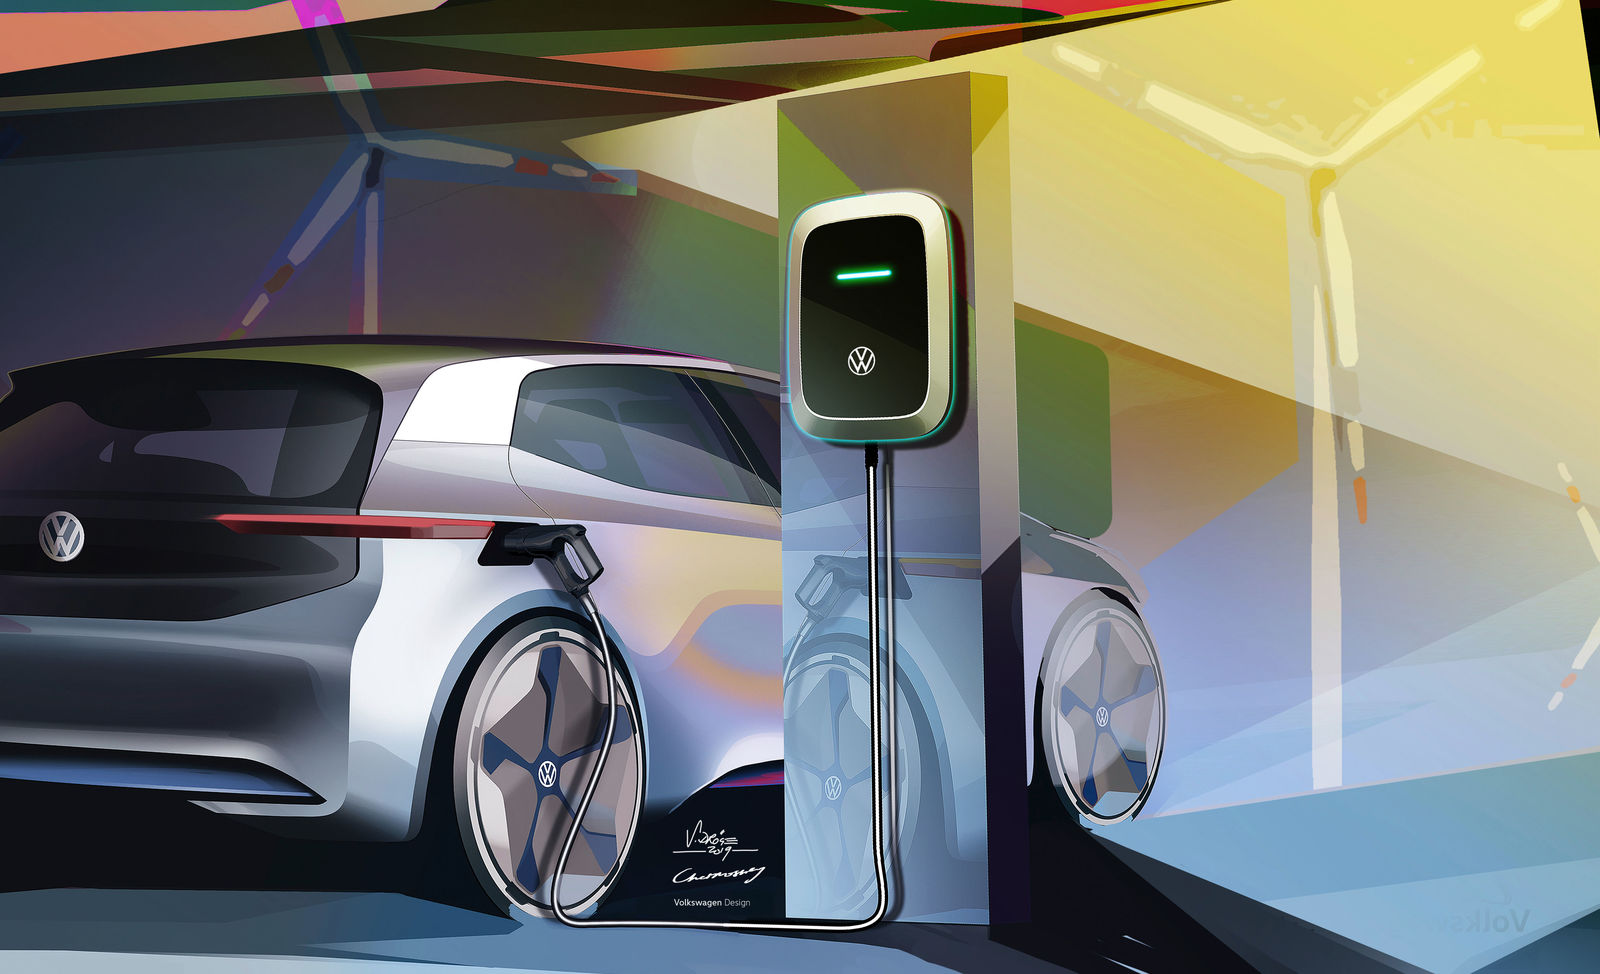 The Volkswagen I.D. will be the pioneer of clean mobility – symbol image